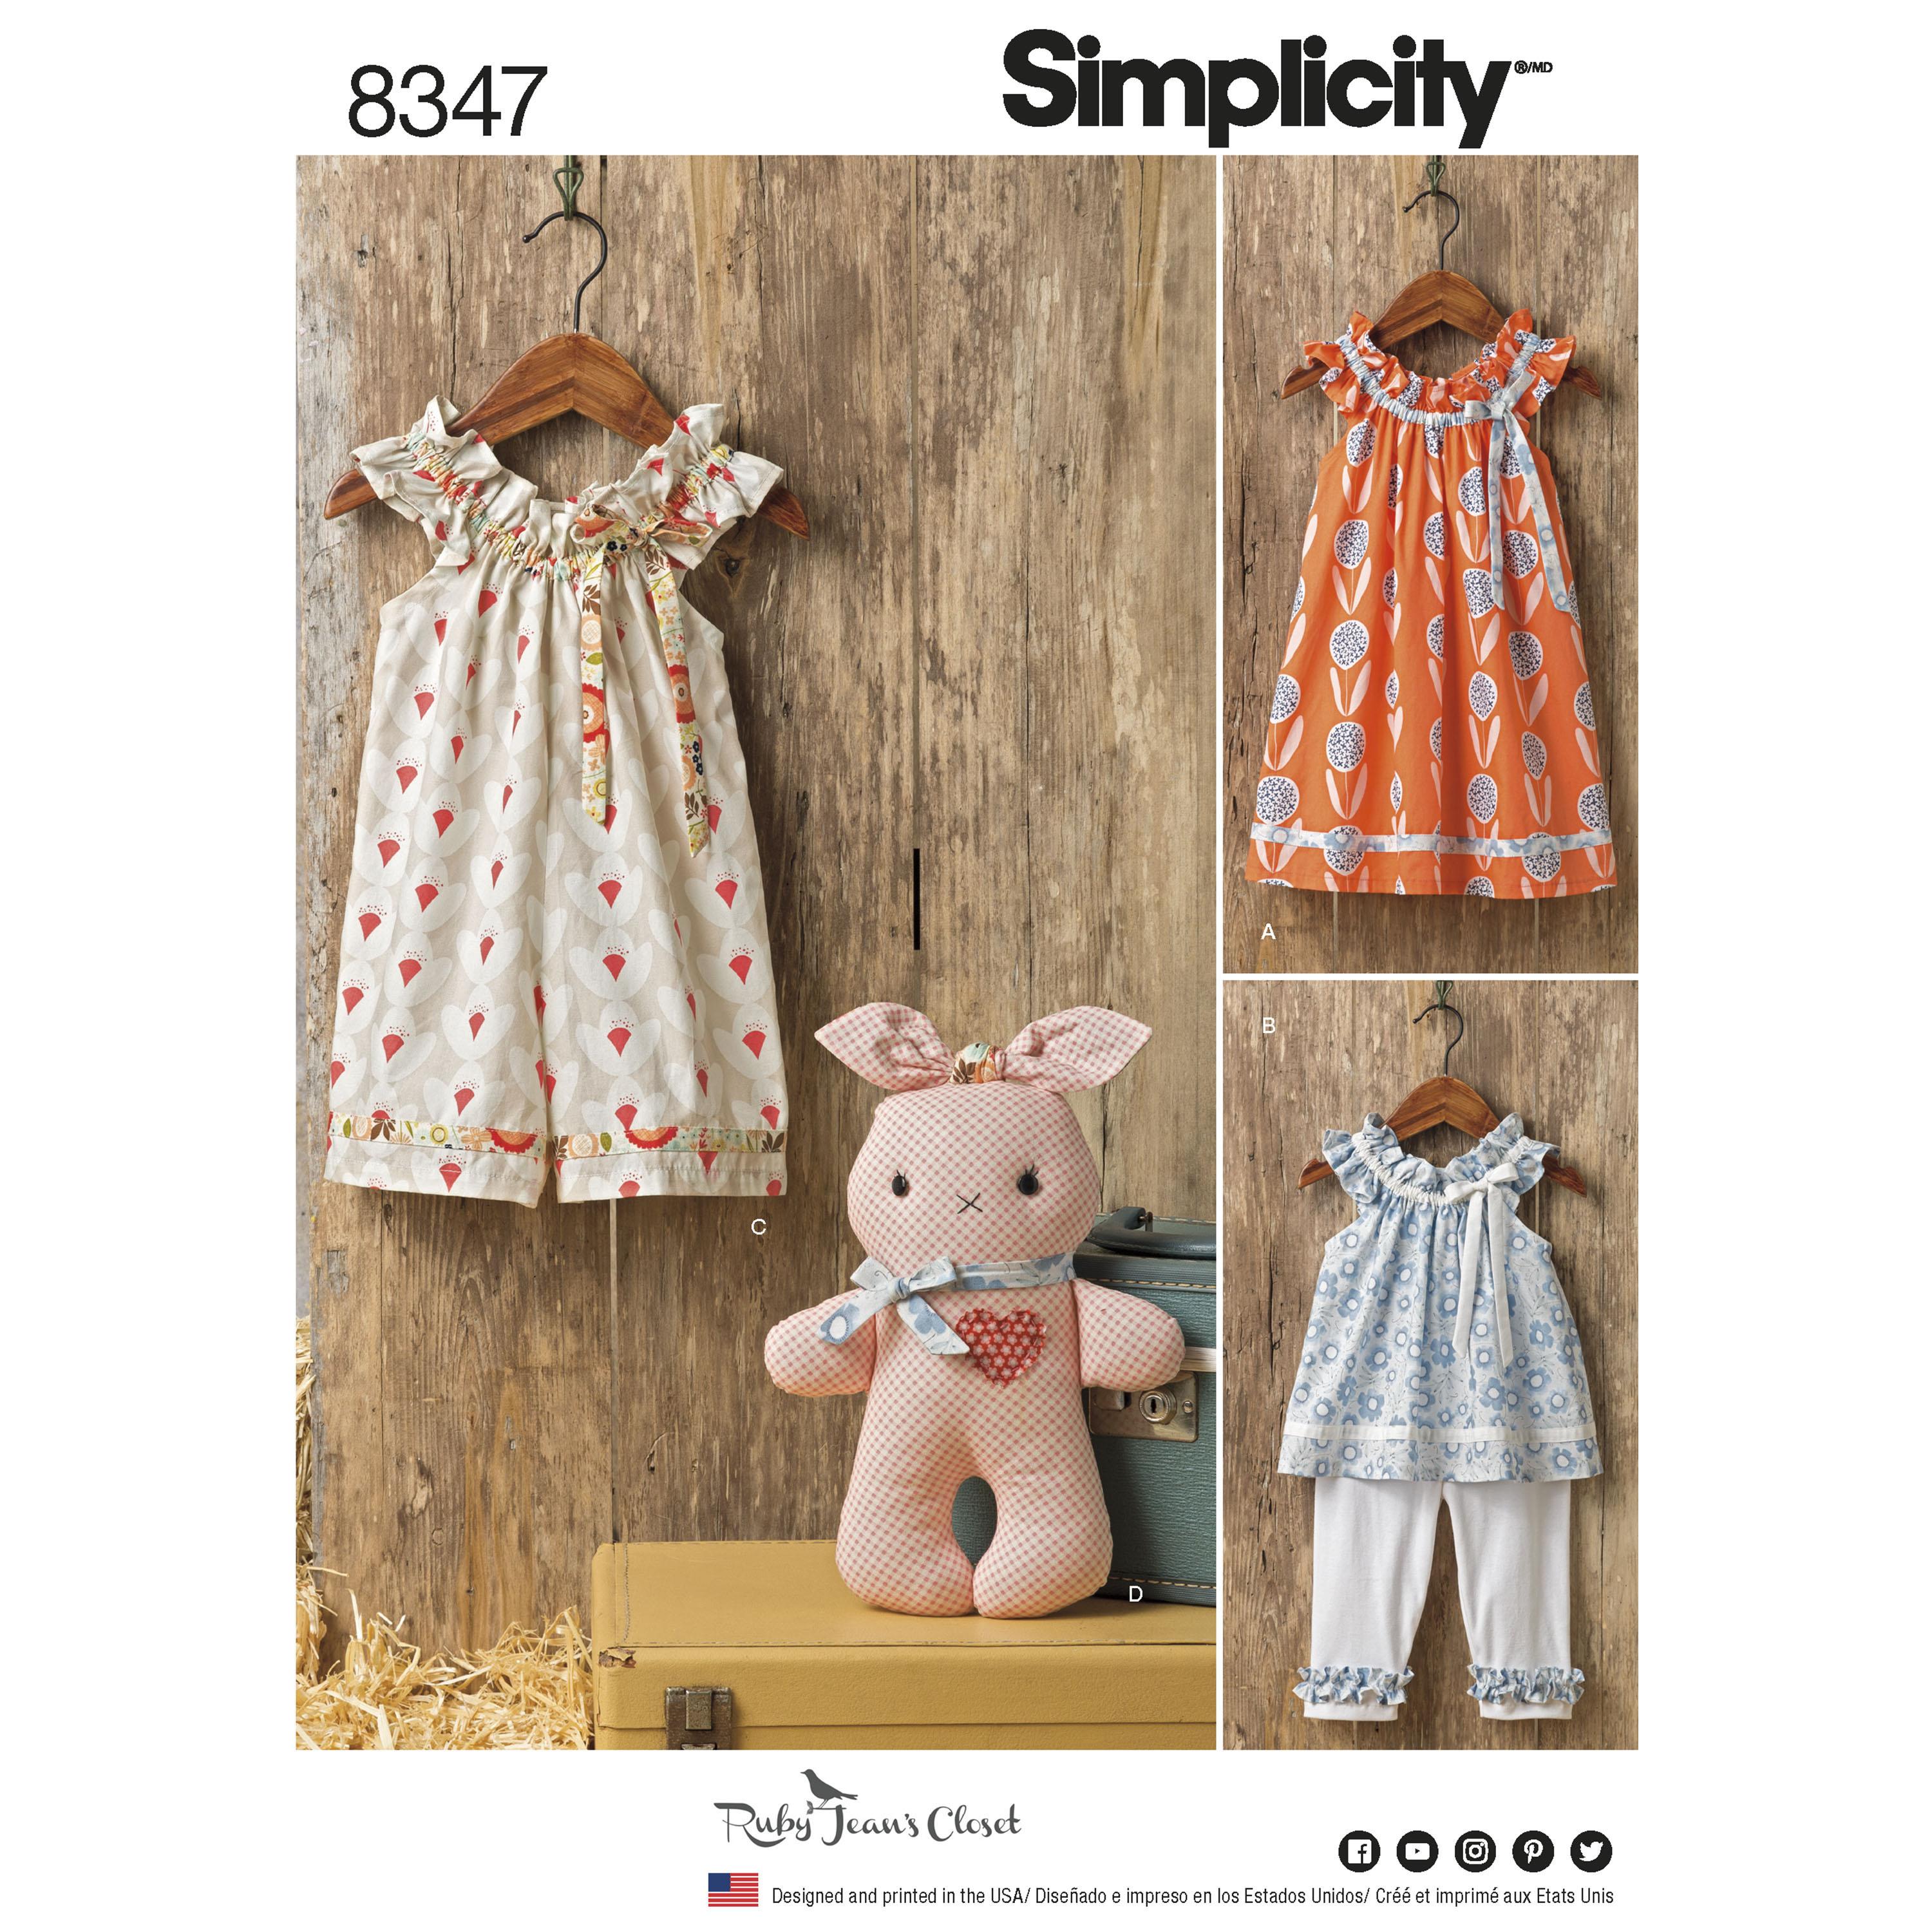 Simplicity S8347 Toddlers' dress, top and knit capris, and stuffed bunny